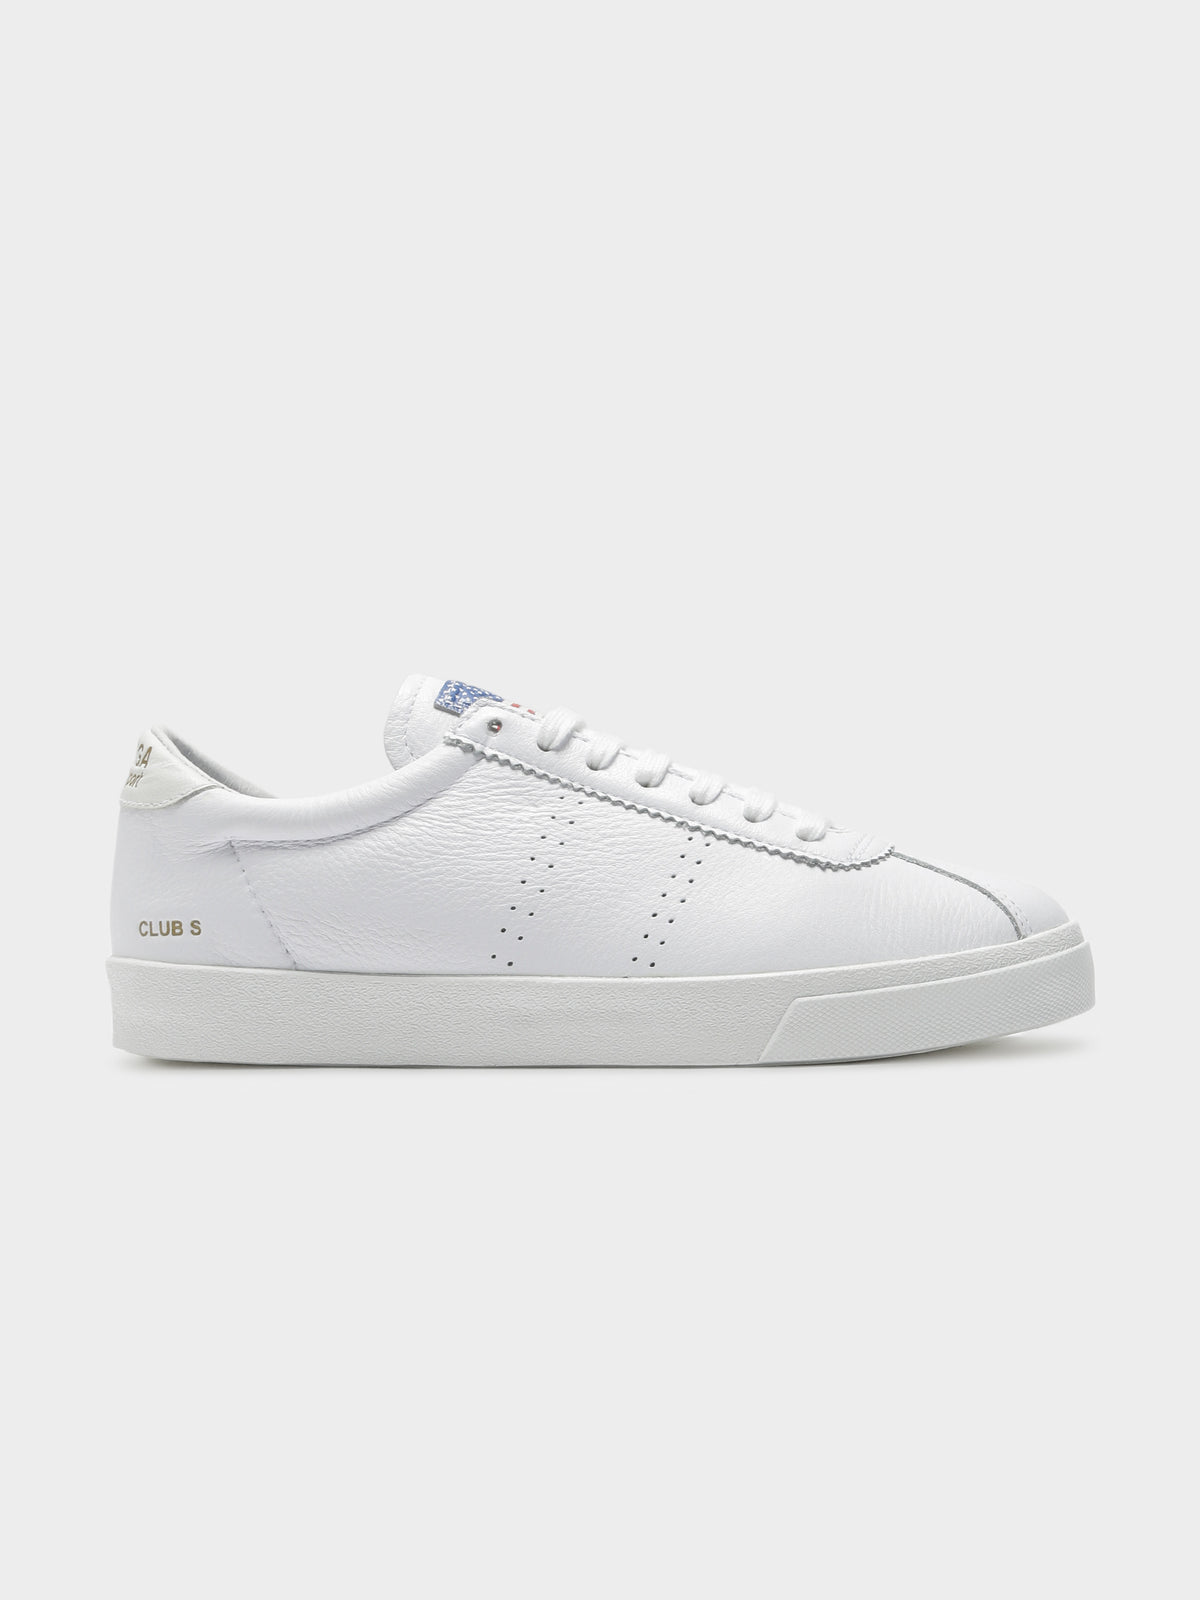 Unisex 2869 Club Comfleau USA Sneakers in White